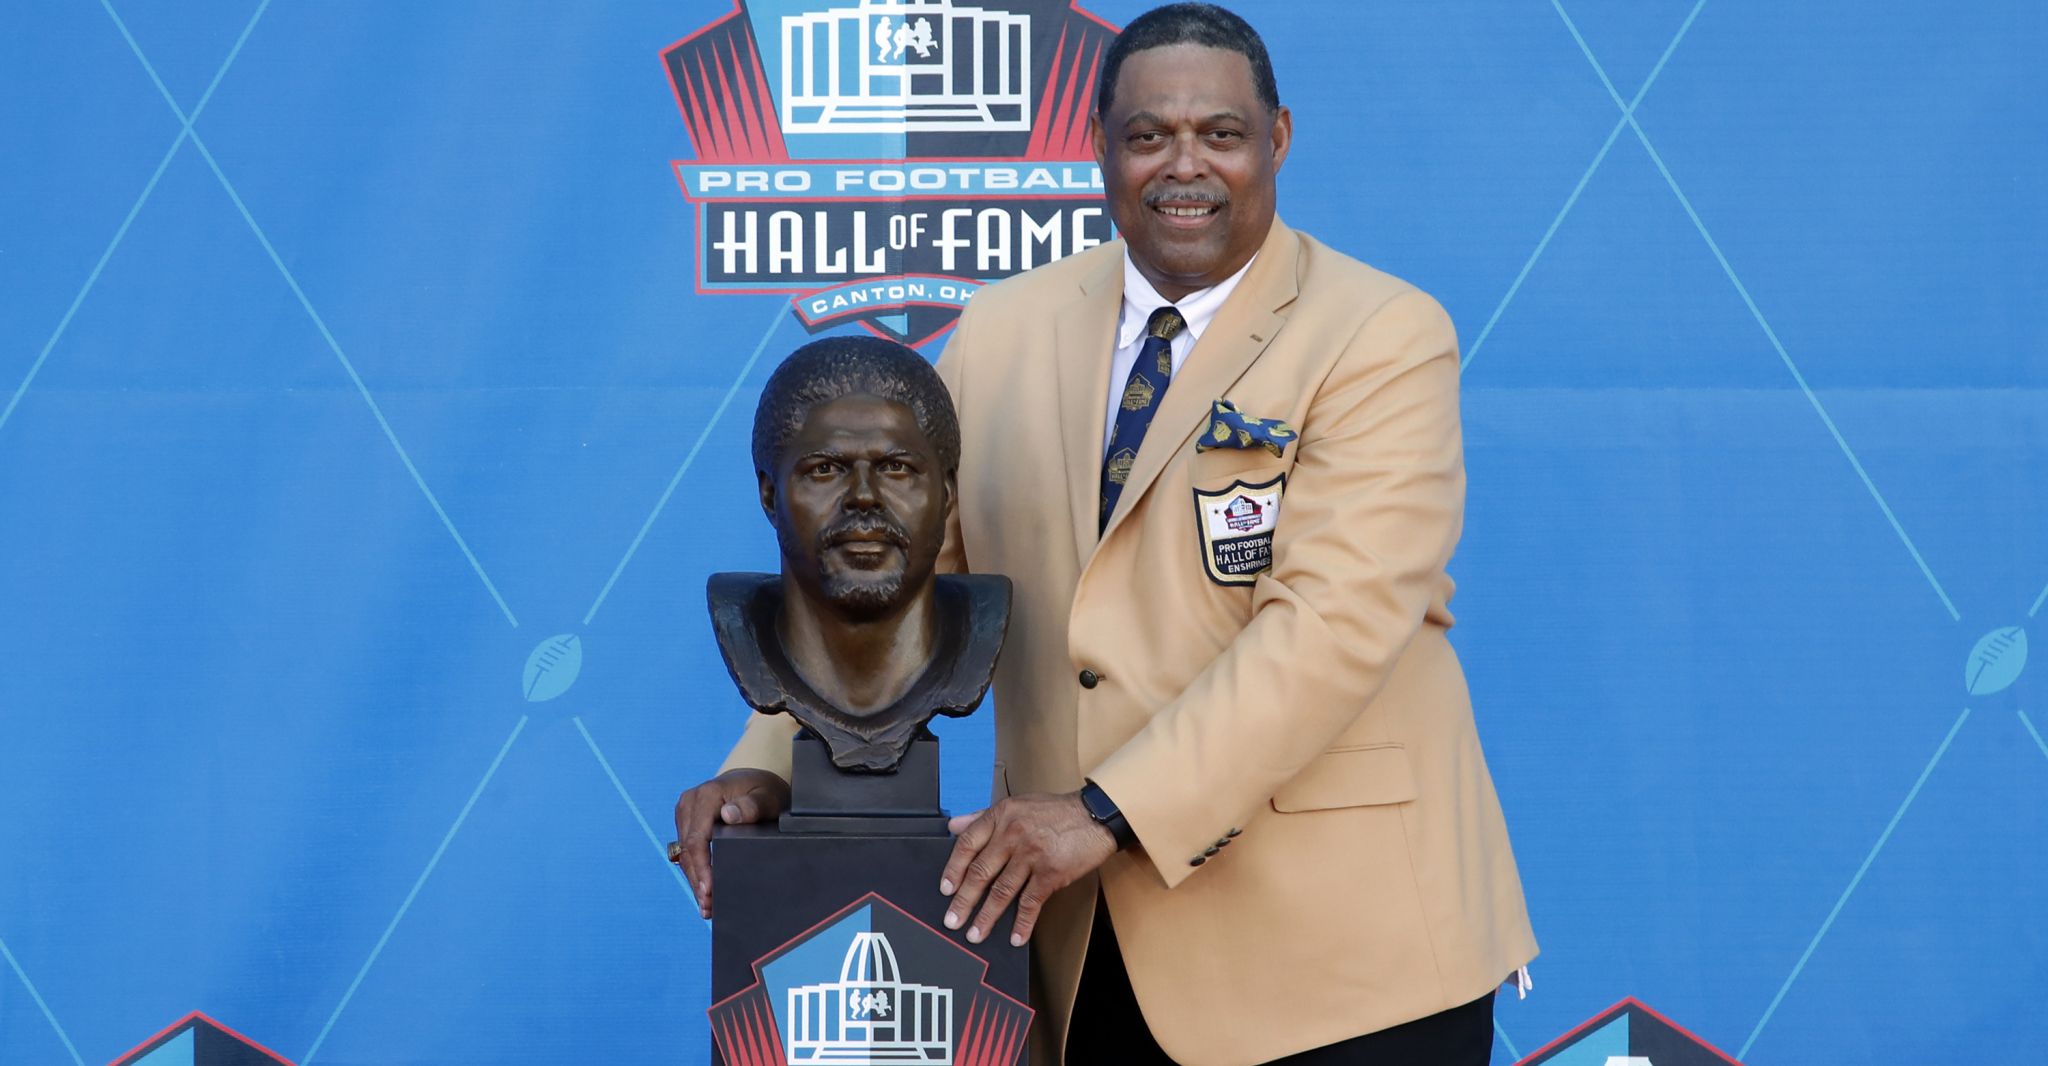 What You Need to Know: Robert Brazile's Hall of Fame Enshrinement